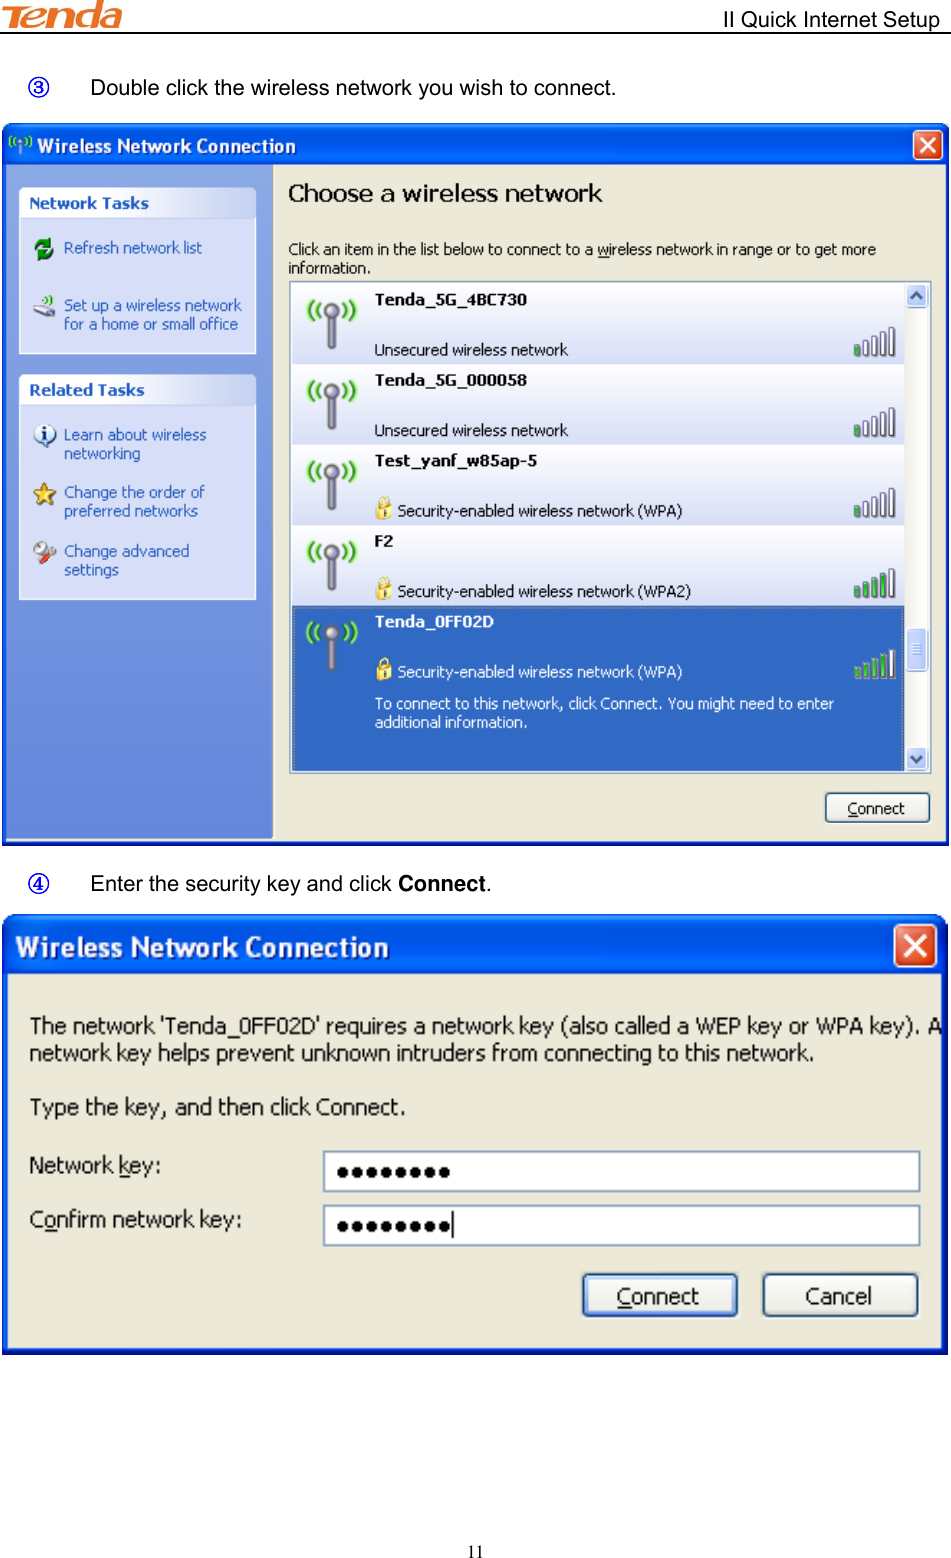                                                        II Quick Internet Setup         11 ③ Double click the wireless network you wish to connect.  ④ Enter the security key and click Connect.  